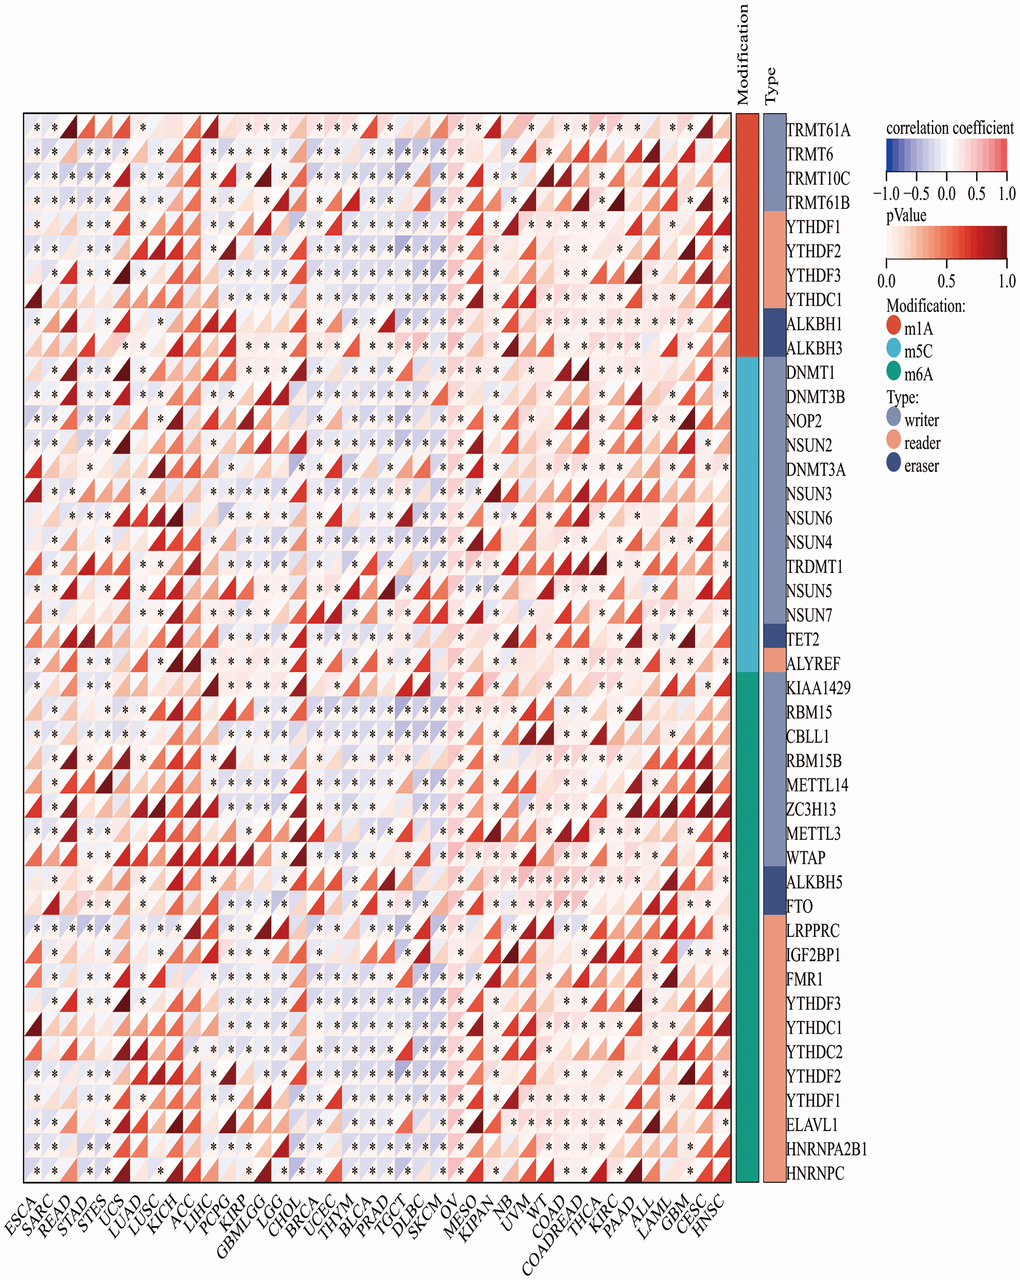 The association heatmaps between CLDN5 expression and DNA methylesterase genes expression in 33 tumors *P 